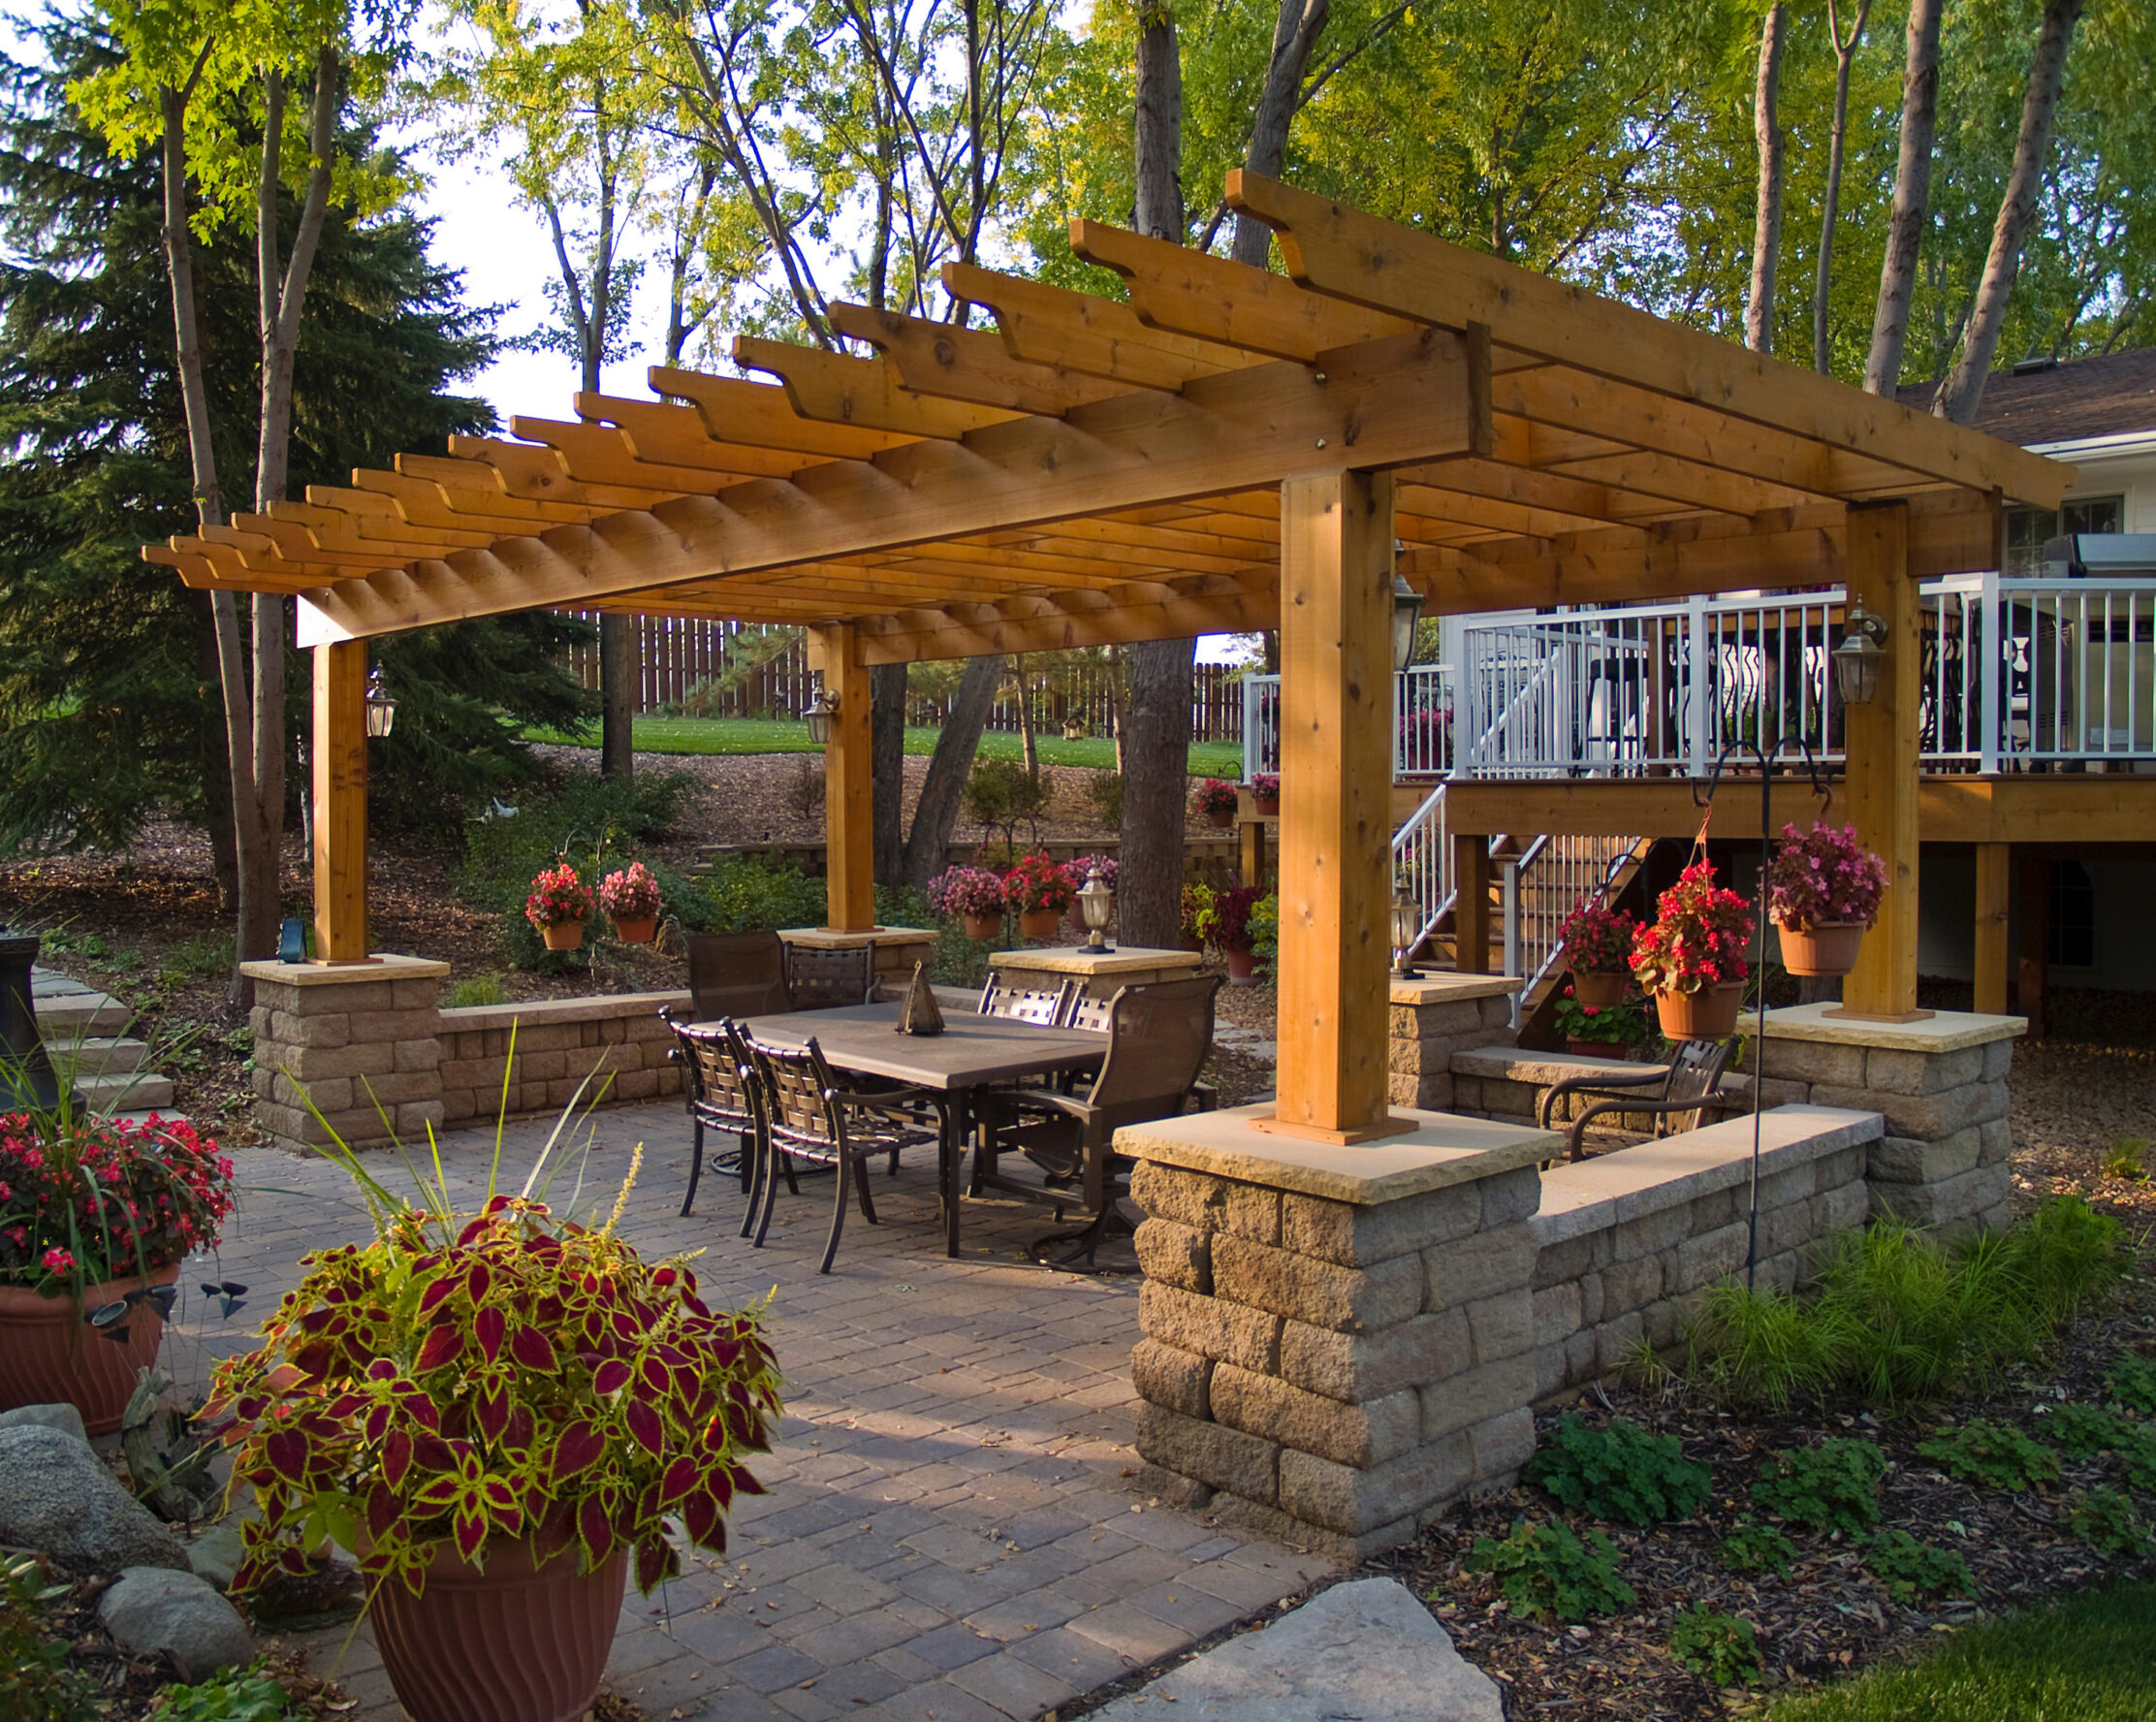 Outdoor pergola designed and built by JBDB.